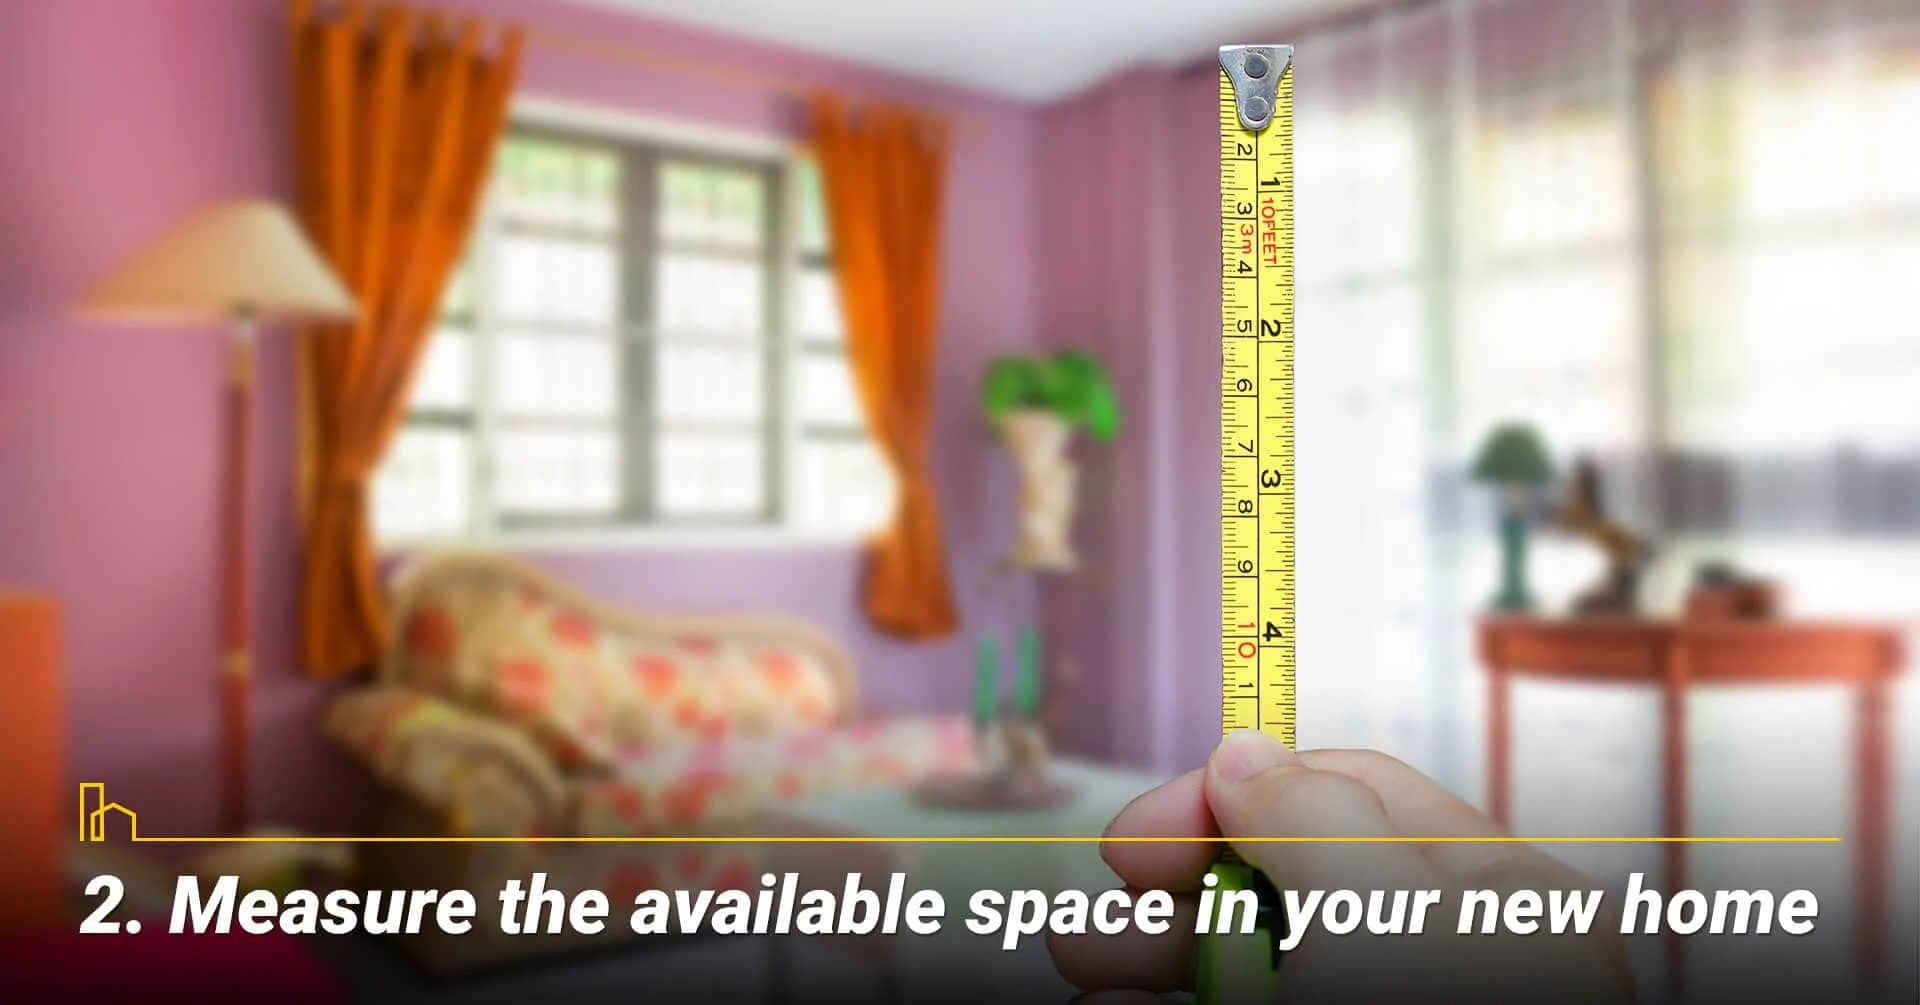 Measure the available space in your new home, take measurements of your new home